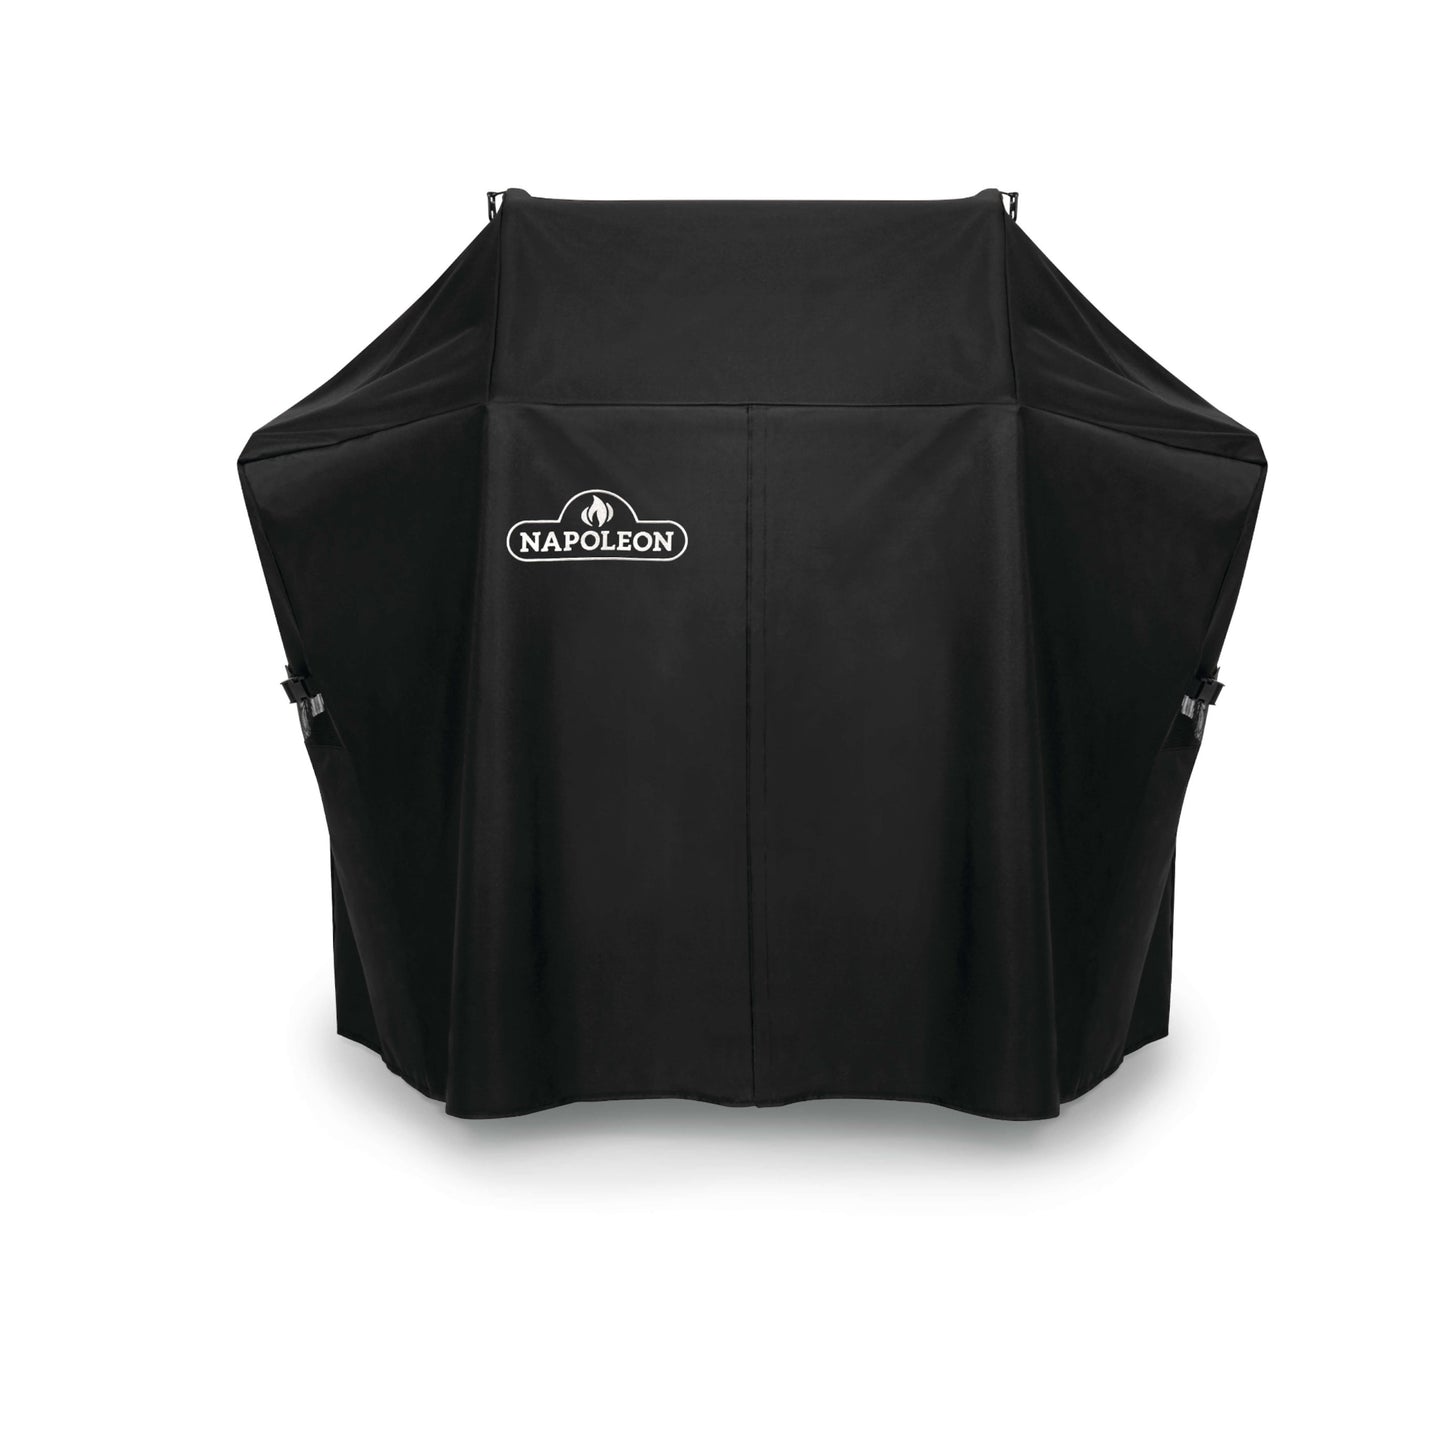 Napoleon Rogue 425 Full Length Grill Cover